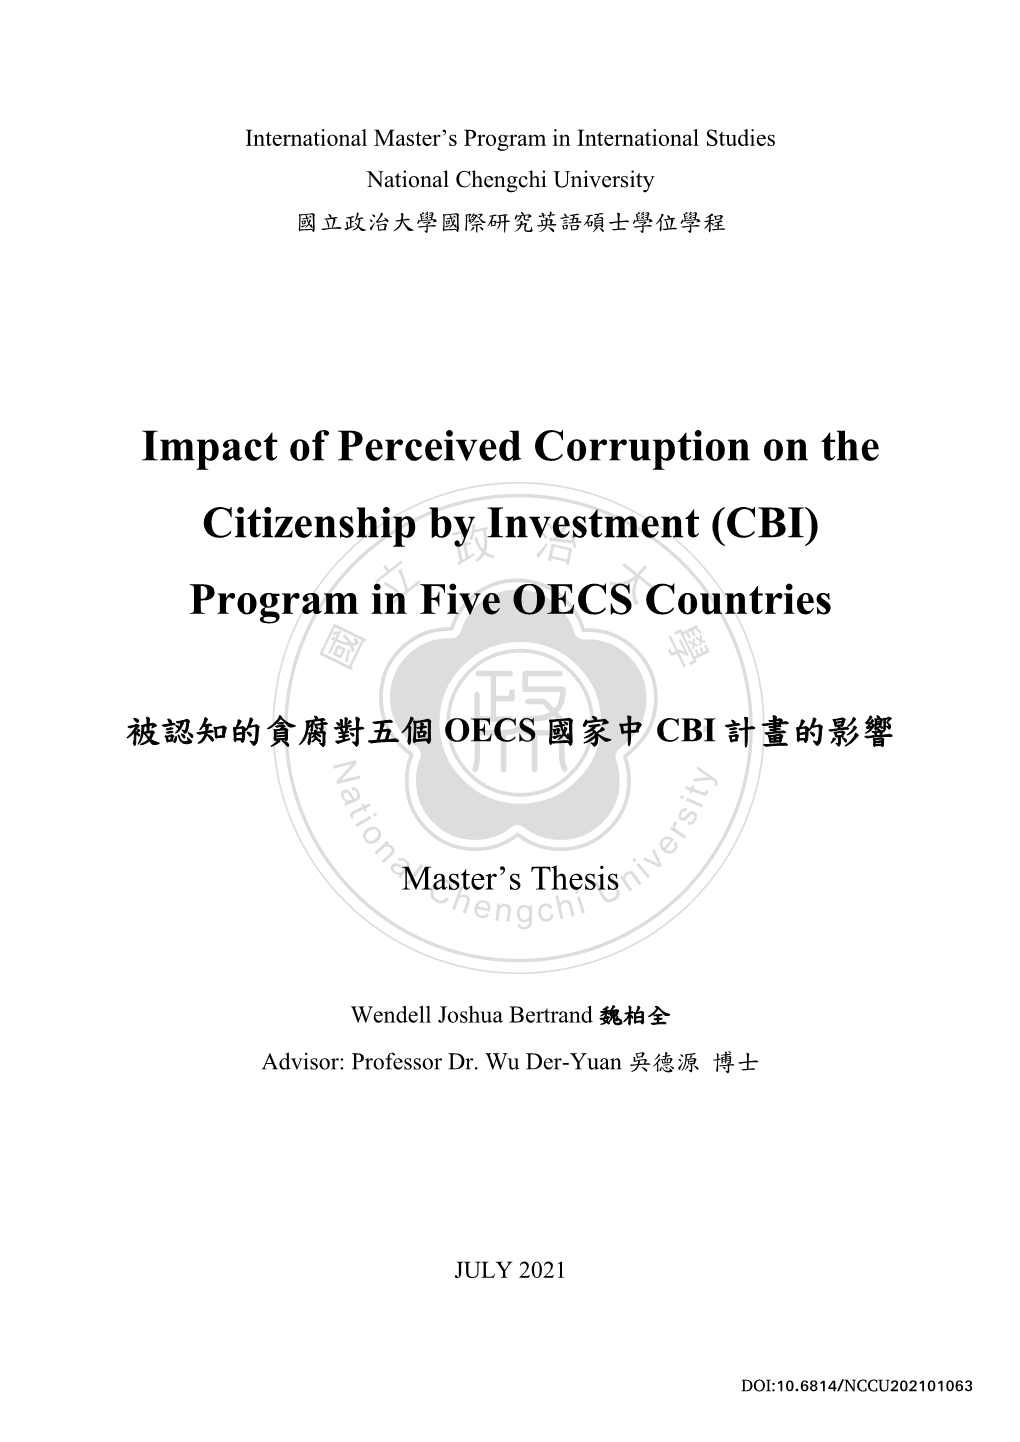 Impact of Perceived Corruption on the Citizenship By